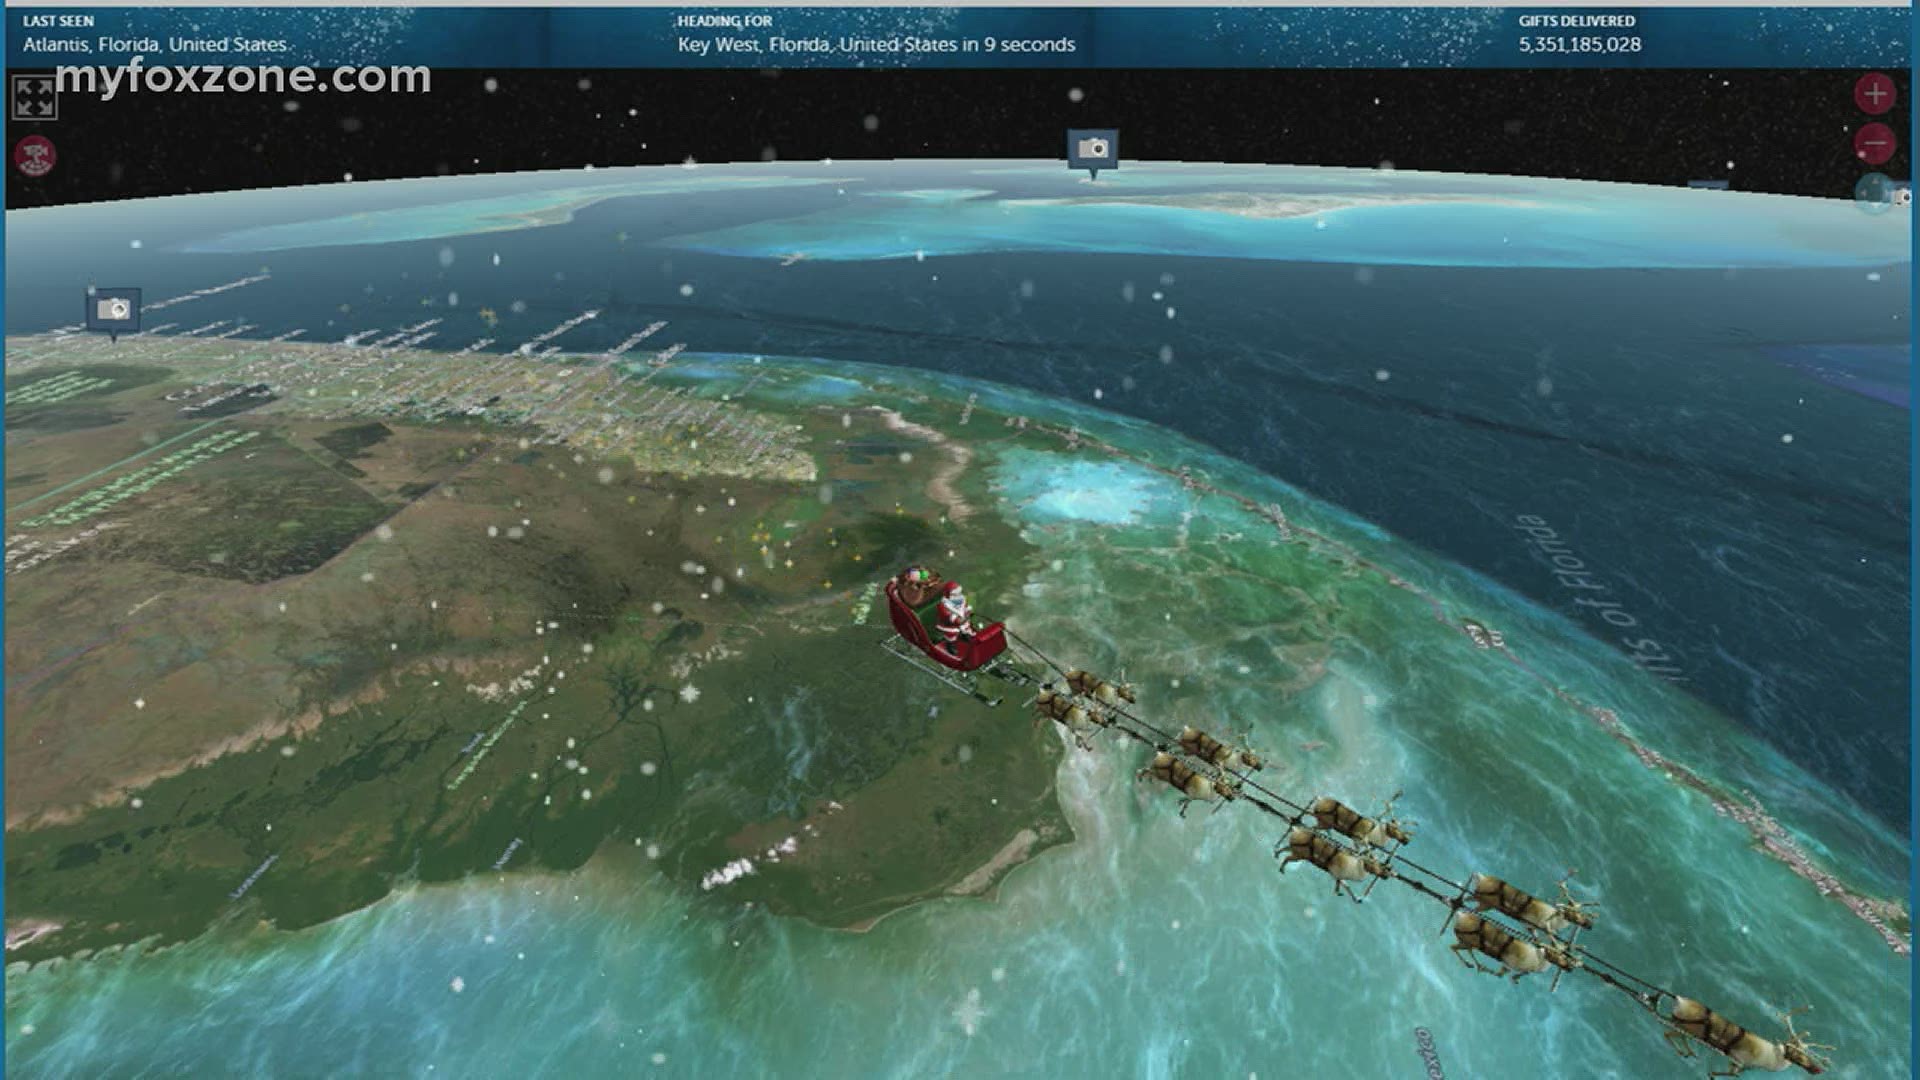 Joe DeCarlo and Tim O'Brien track Santa Claus as he makes his way into the United States.